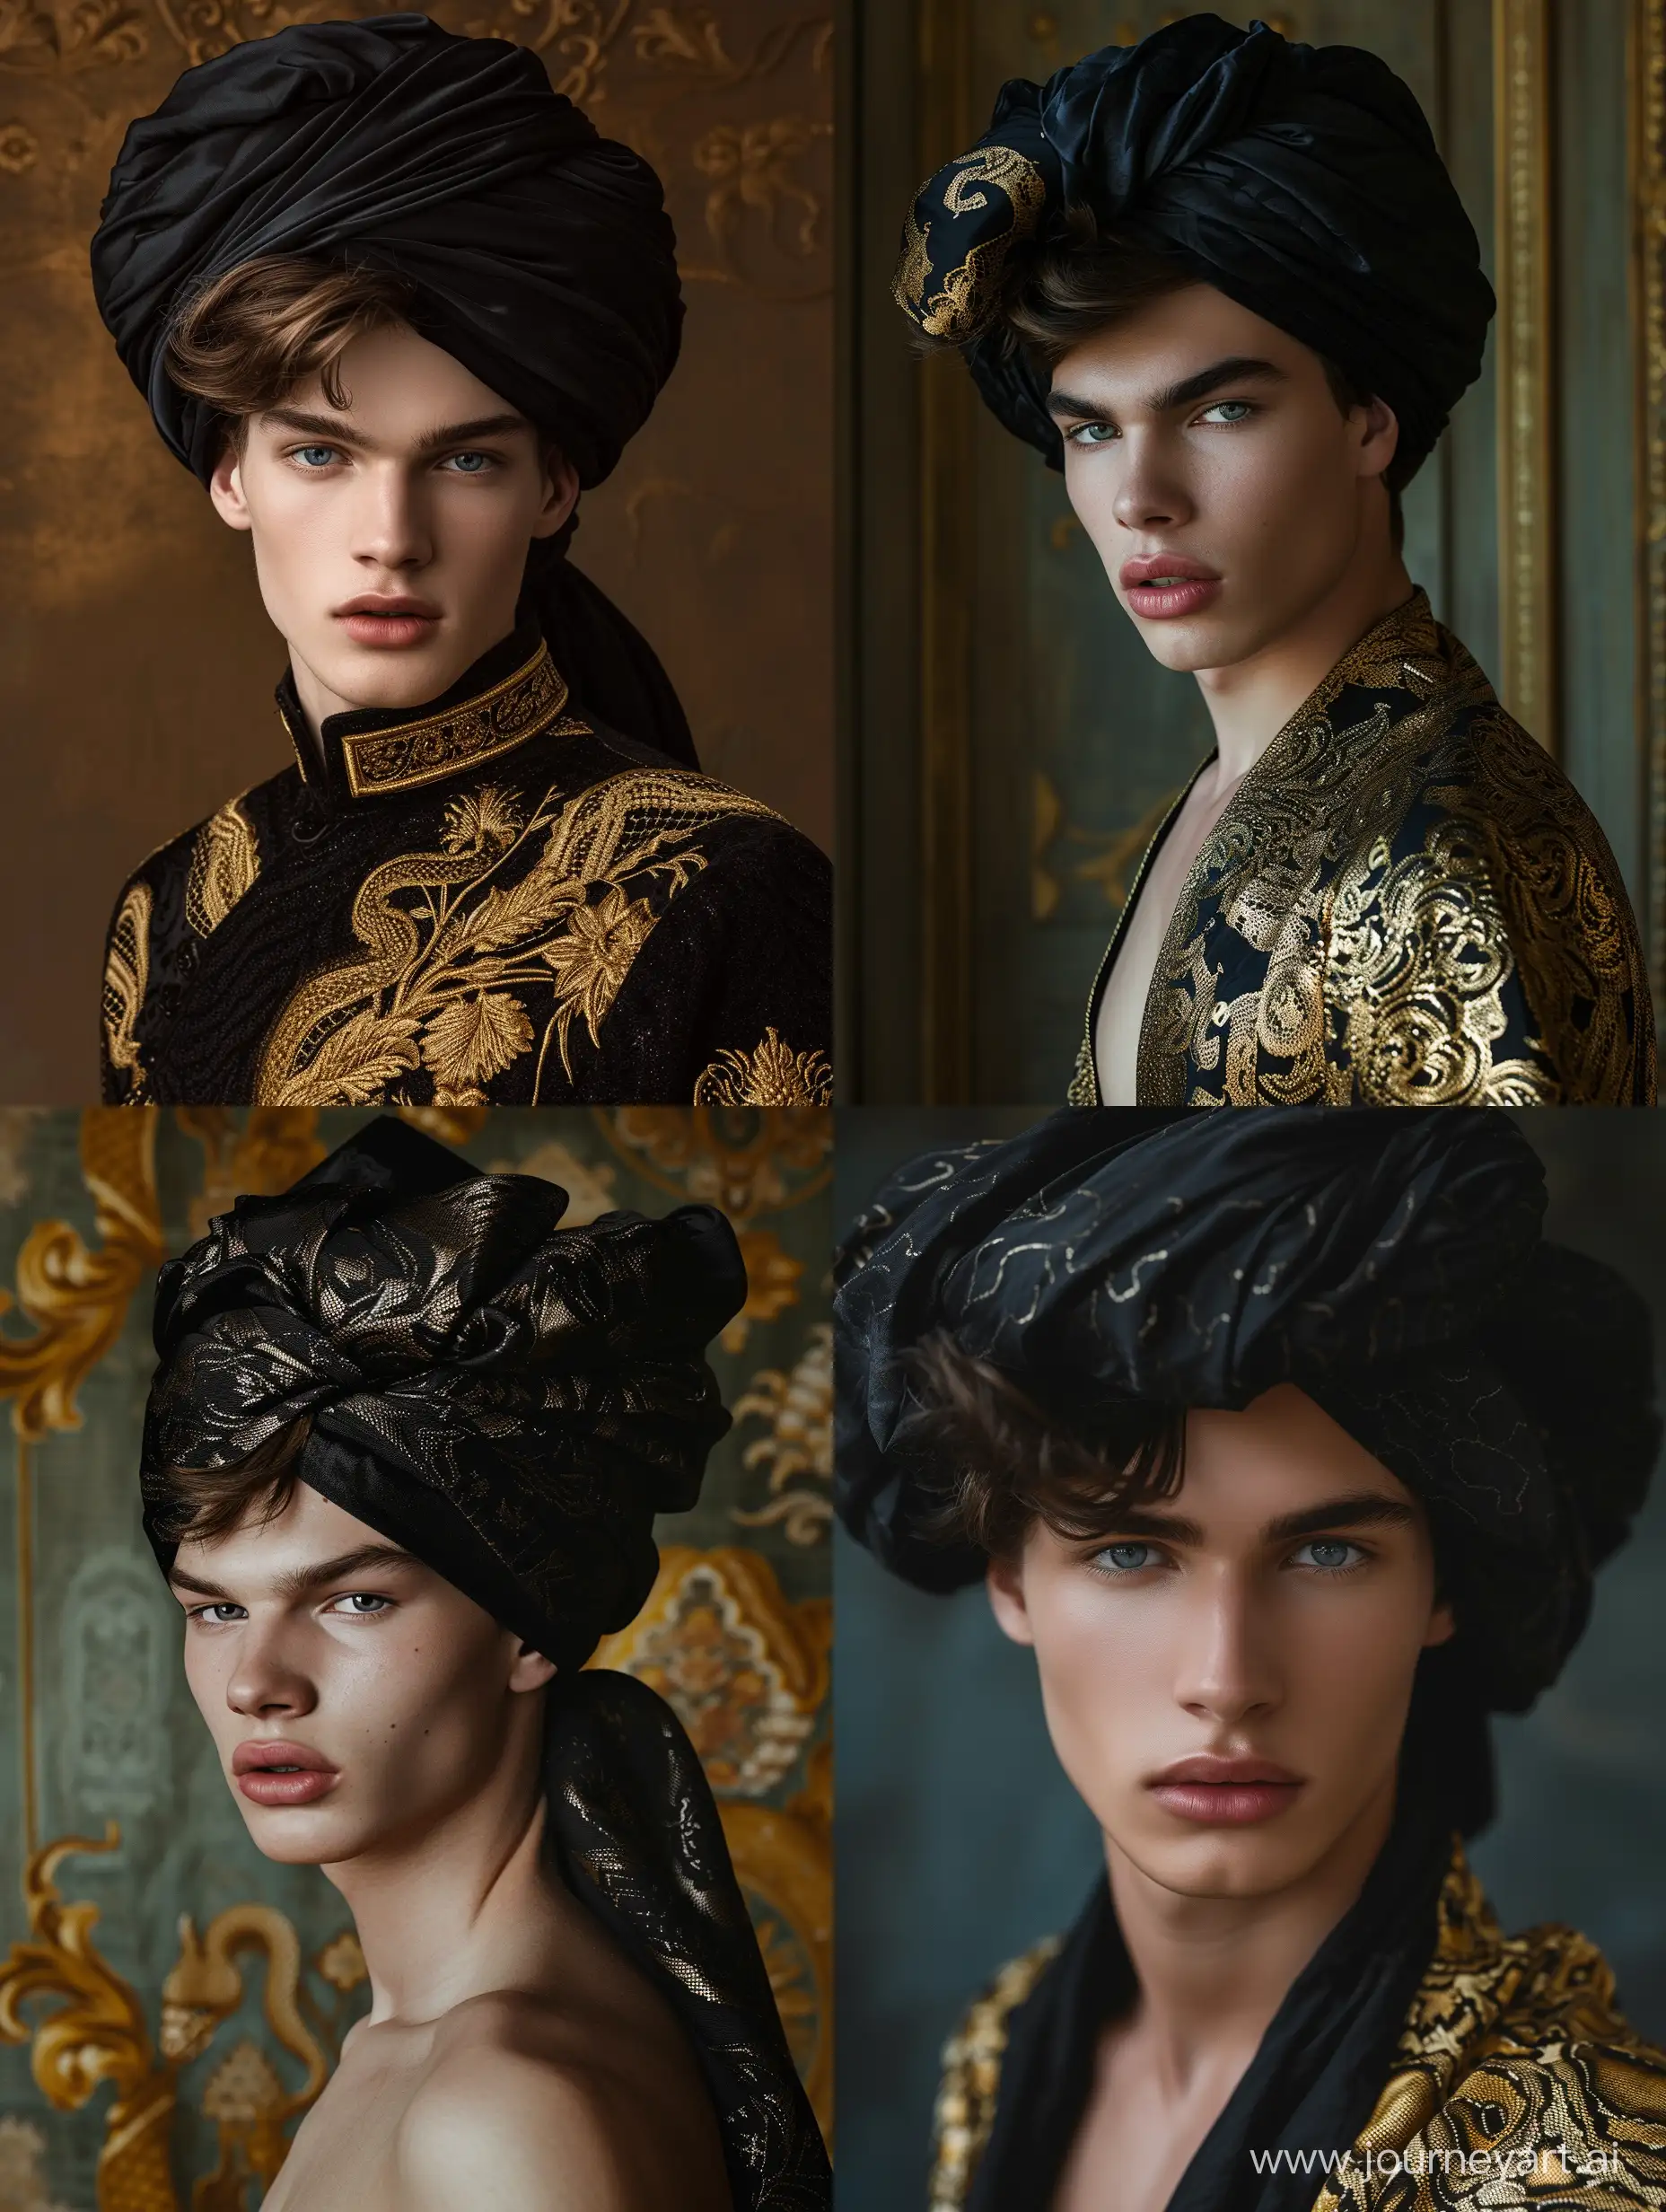 Luxurious-Oriental-Elegance-Hyperrealistic-Portrait-of-a-Handsome-20YearOld-in-Black-Turban-with-Gold-and-Snake-Accents